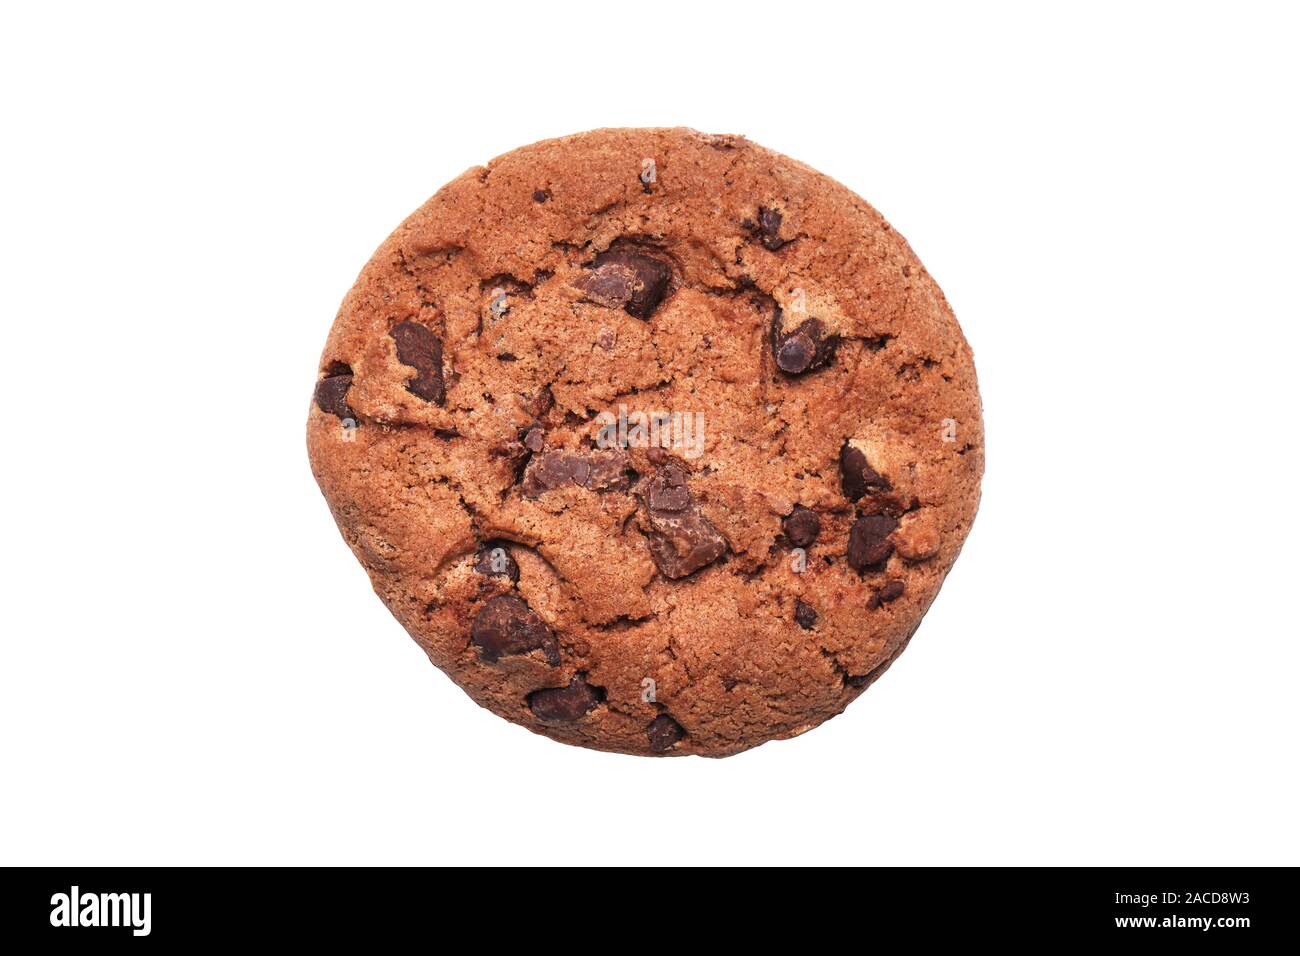 double chocolate chip cookie or biscuit - topview isolated on white background Stock Photo